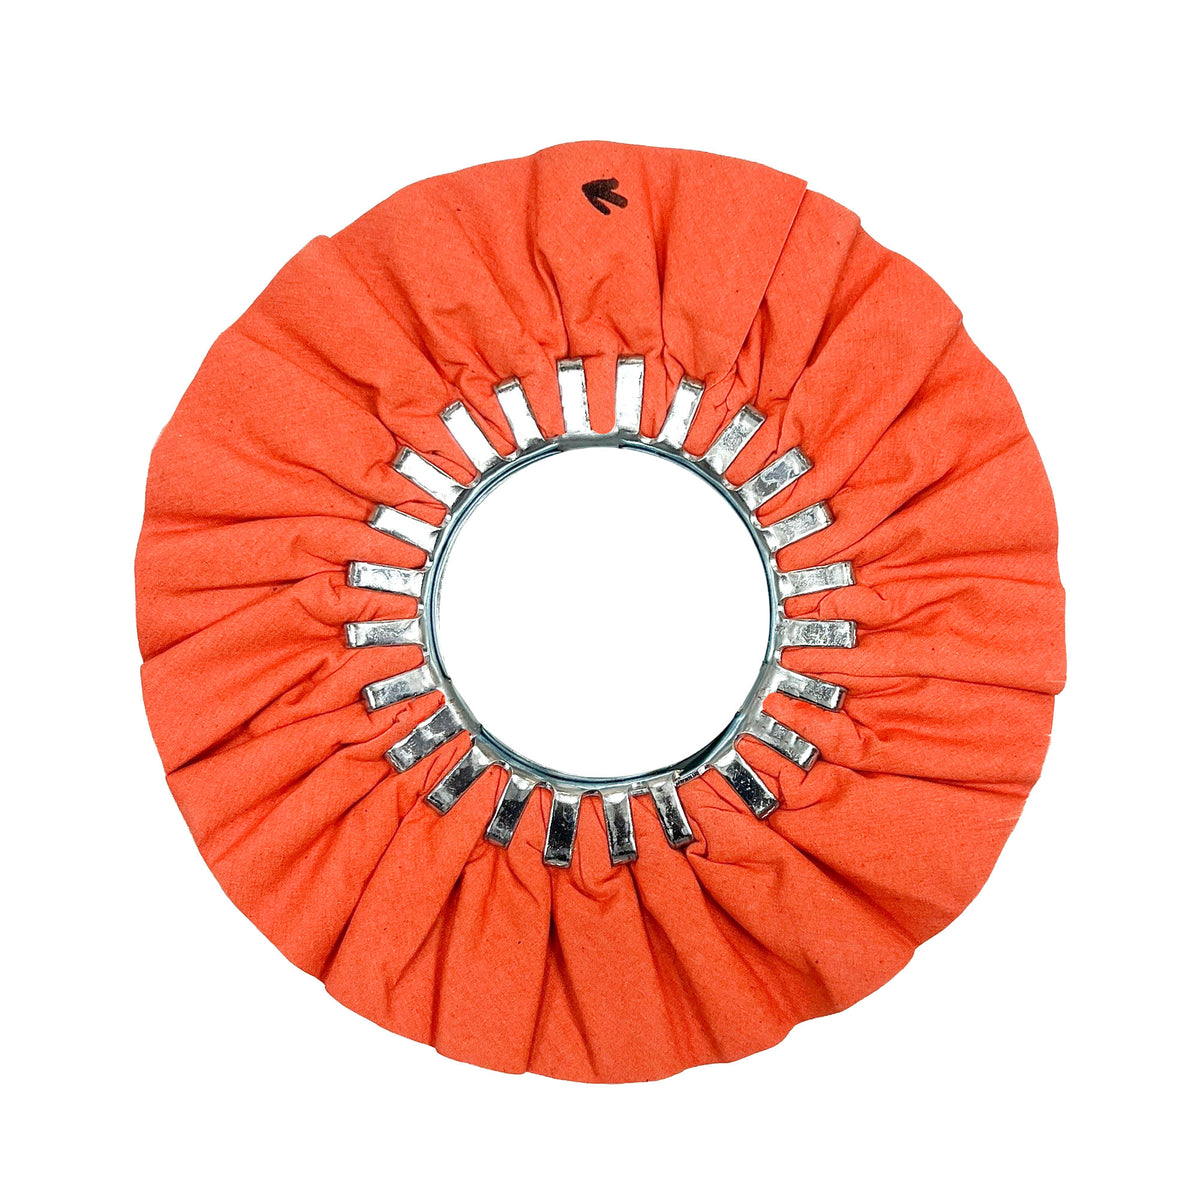 Renegade Products USA Orange Airway Buffing Wheel - High-Quality Buffing and Polishing Tool for Superior Results